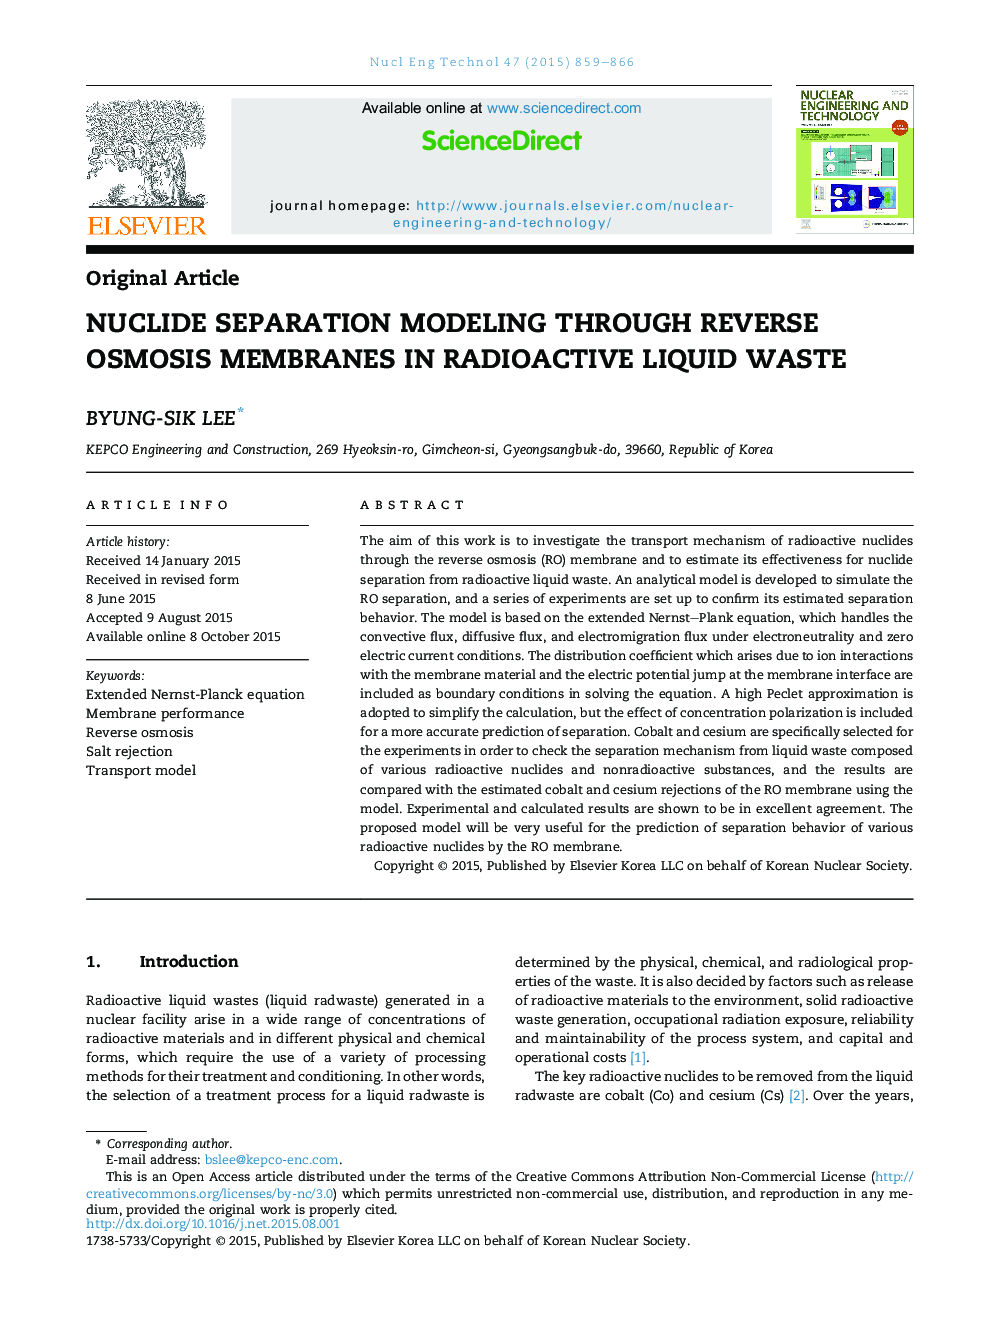 Nuclide separation modeling through reverse osmosis membranes in radioactive liquid waste 